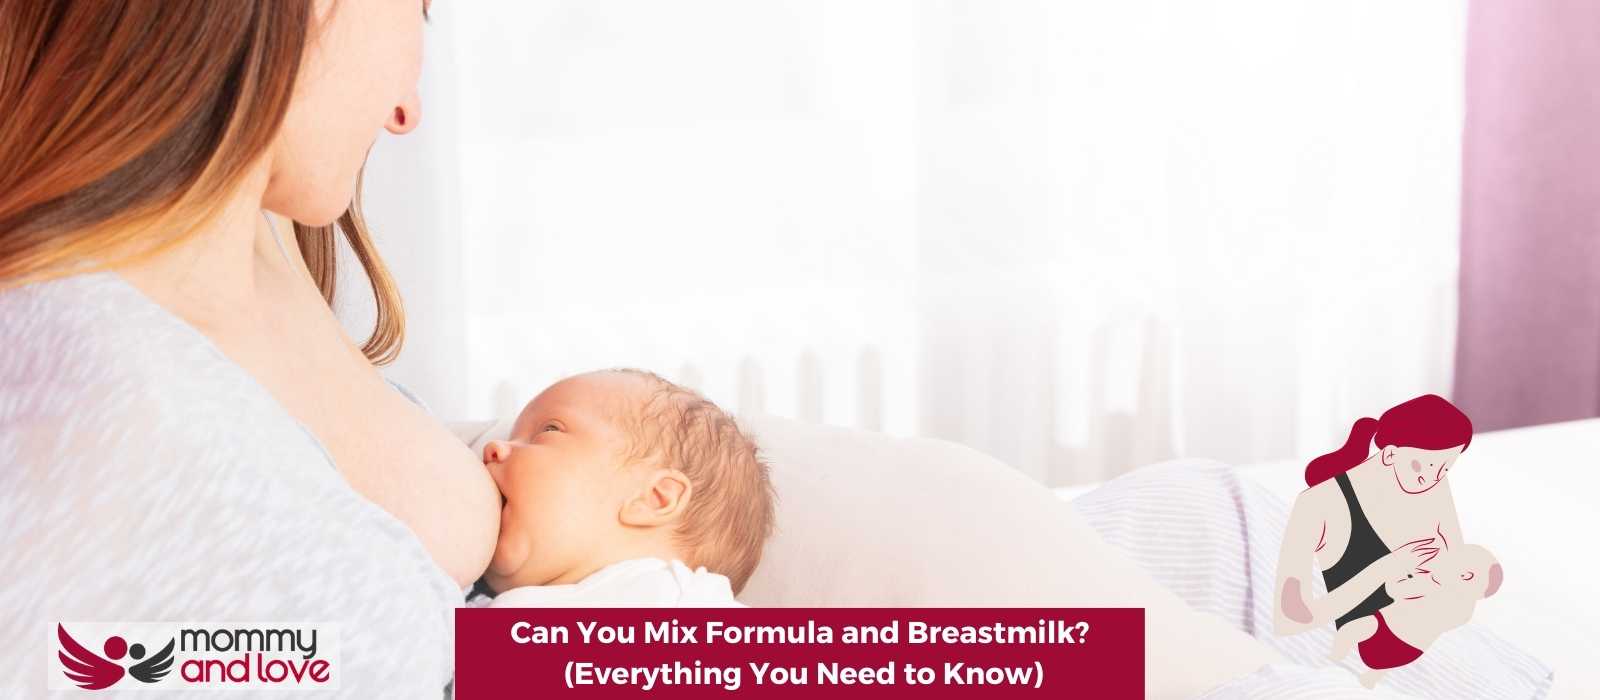 Can You Mix Formula and Breastmilk? (Everything You Need to Know)